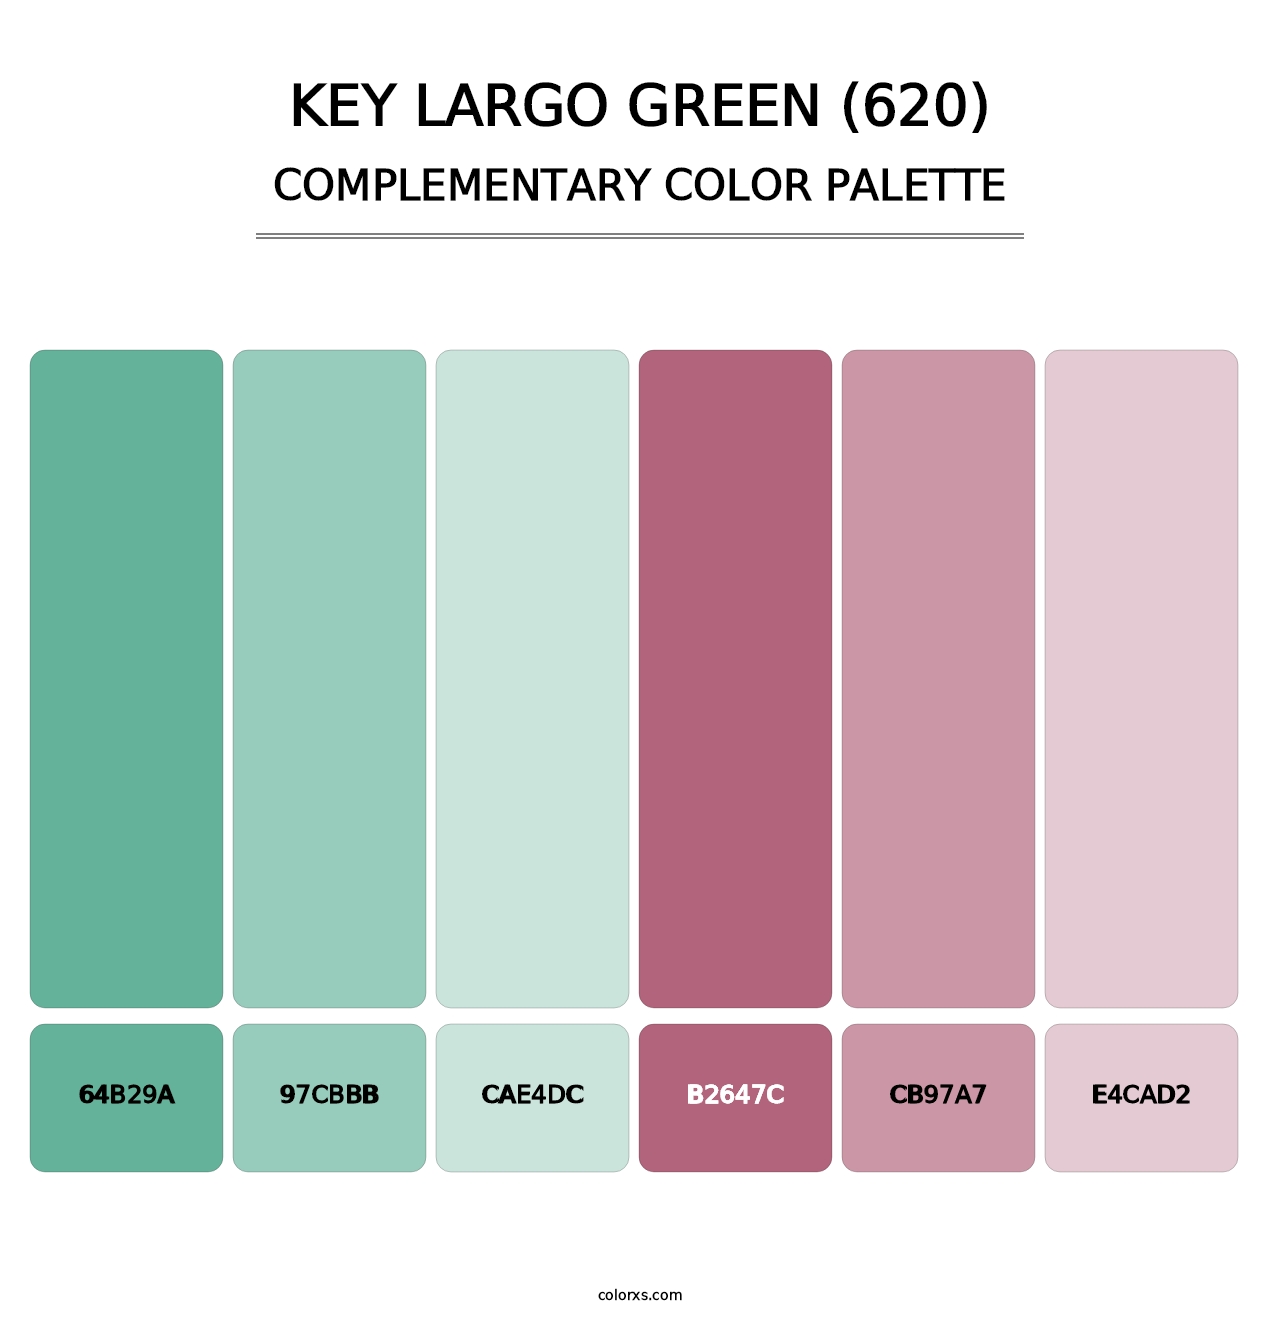 Key Largo Green (620) - Complementary Color Palette